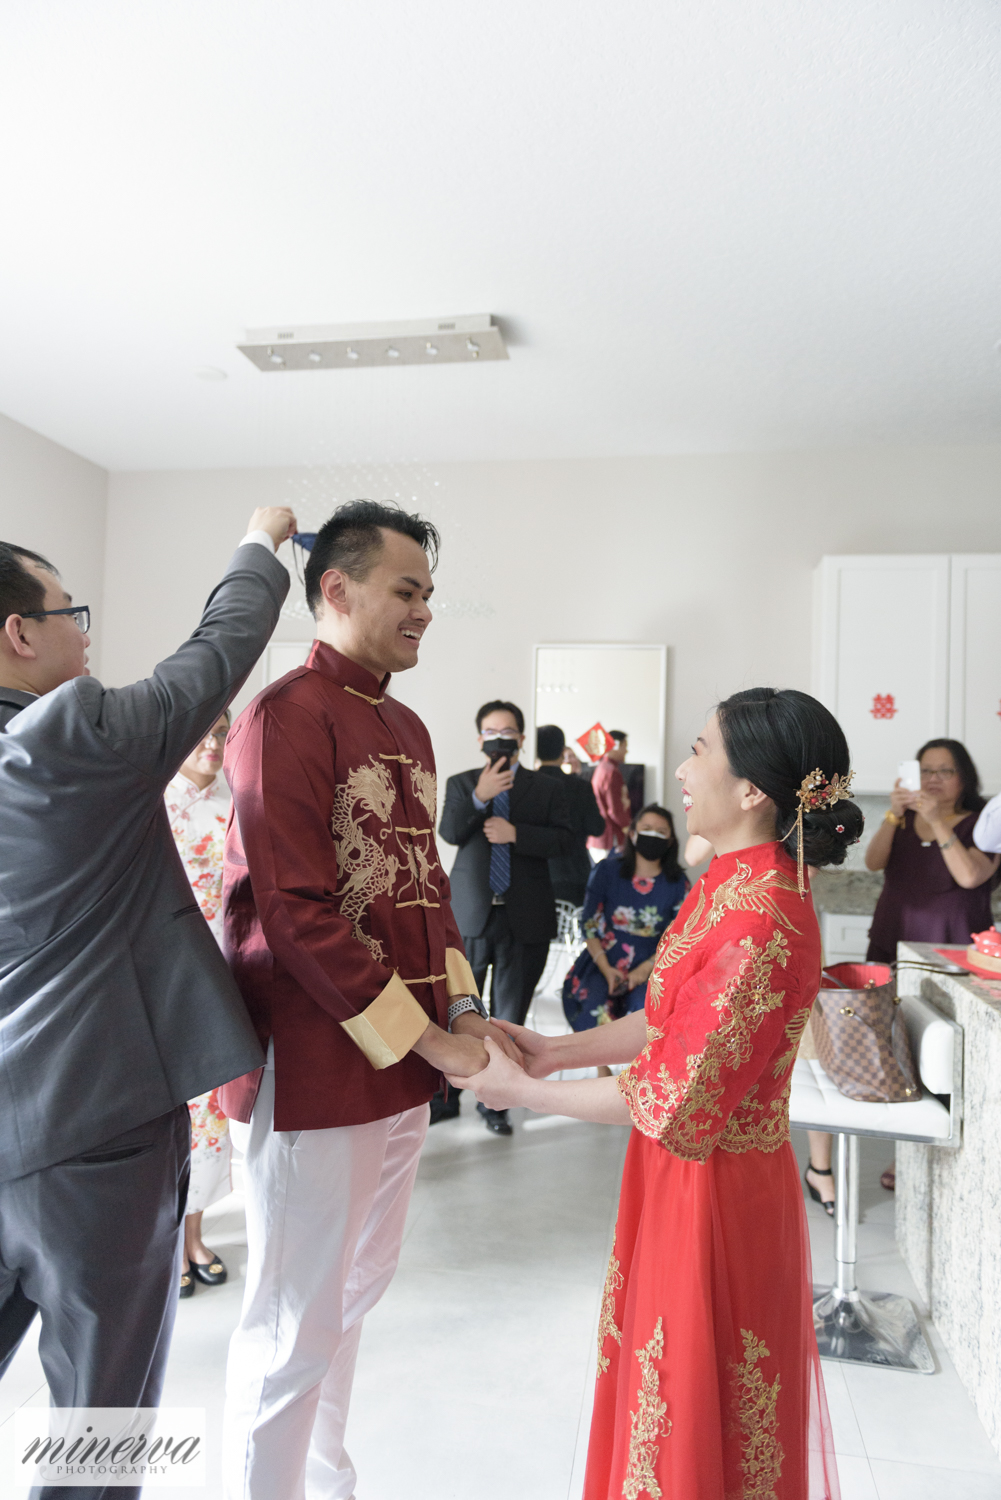 044_chinese-tea-ceremony_red-dress_four-seasons-resort-orlando_walt-disney-world_wedding_first-look_staircase_central-florida-photographer_luxury-photography